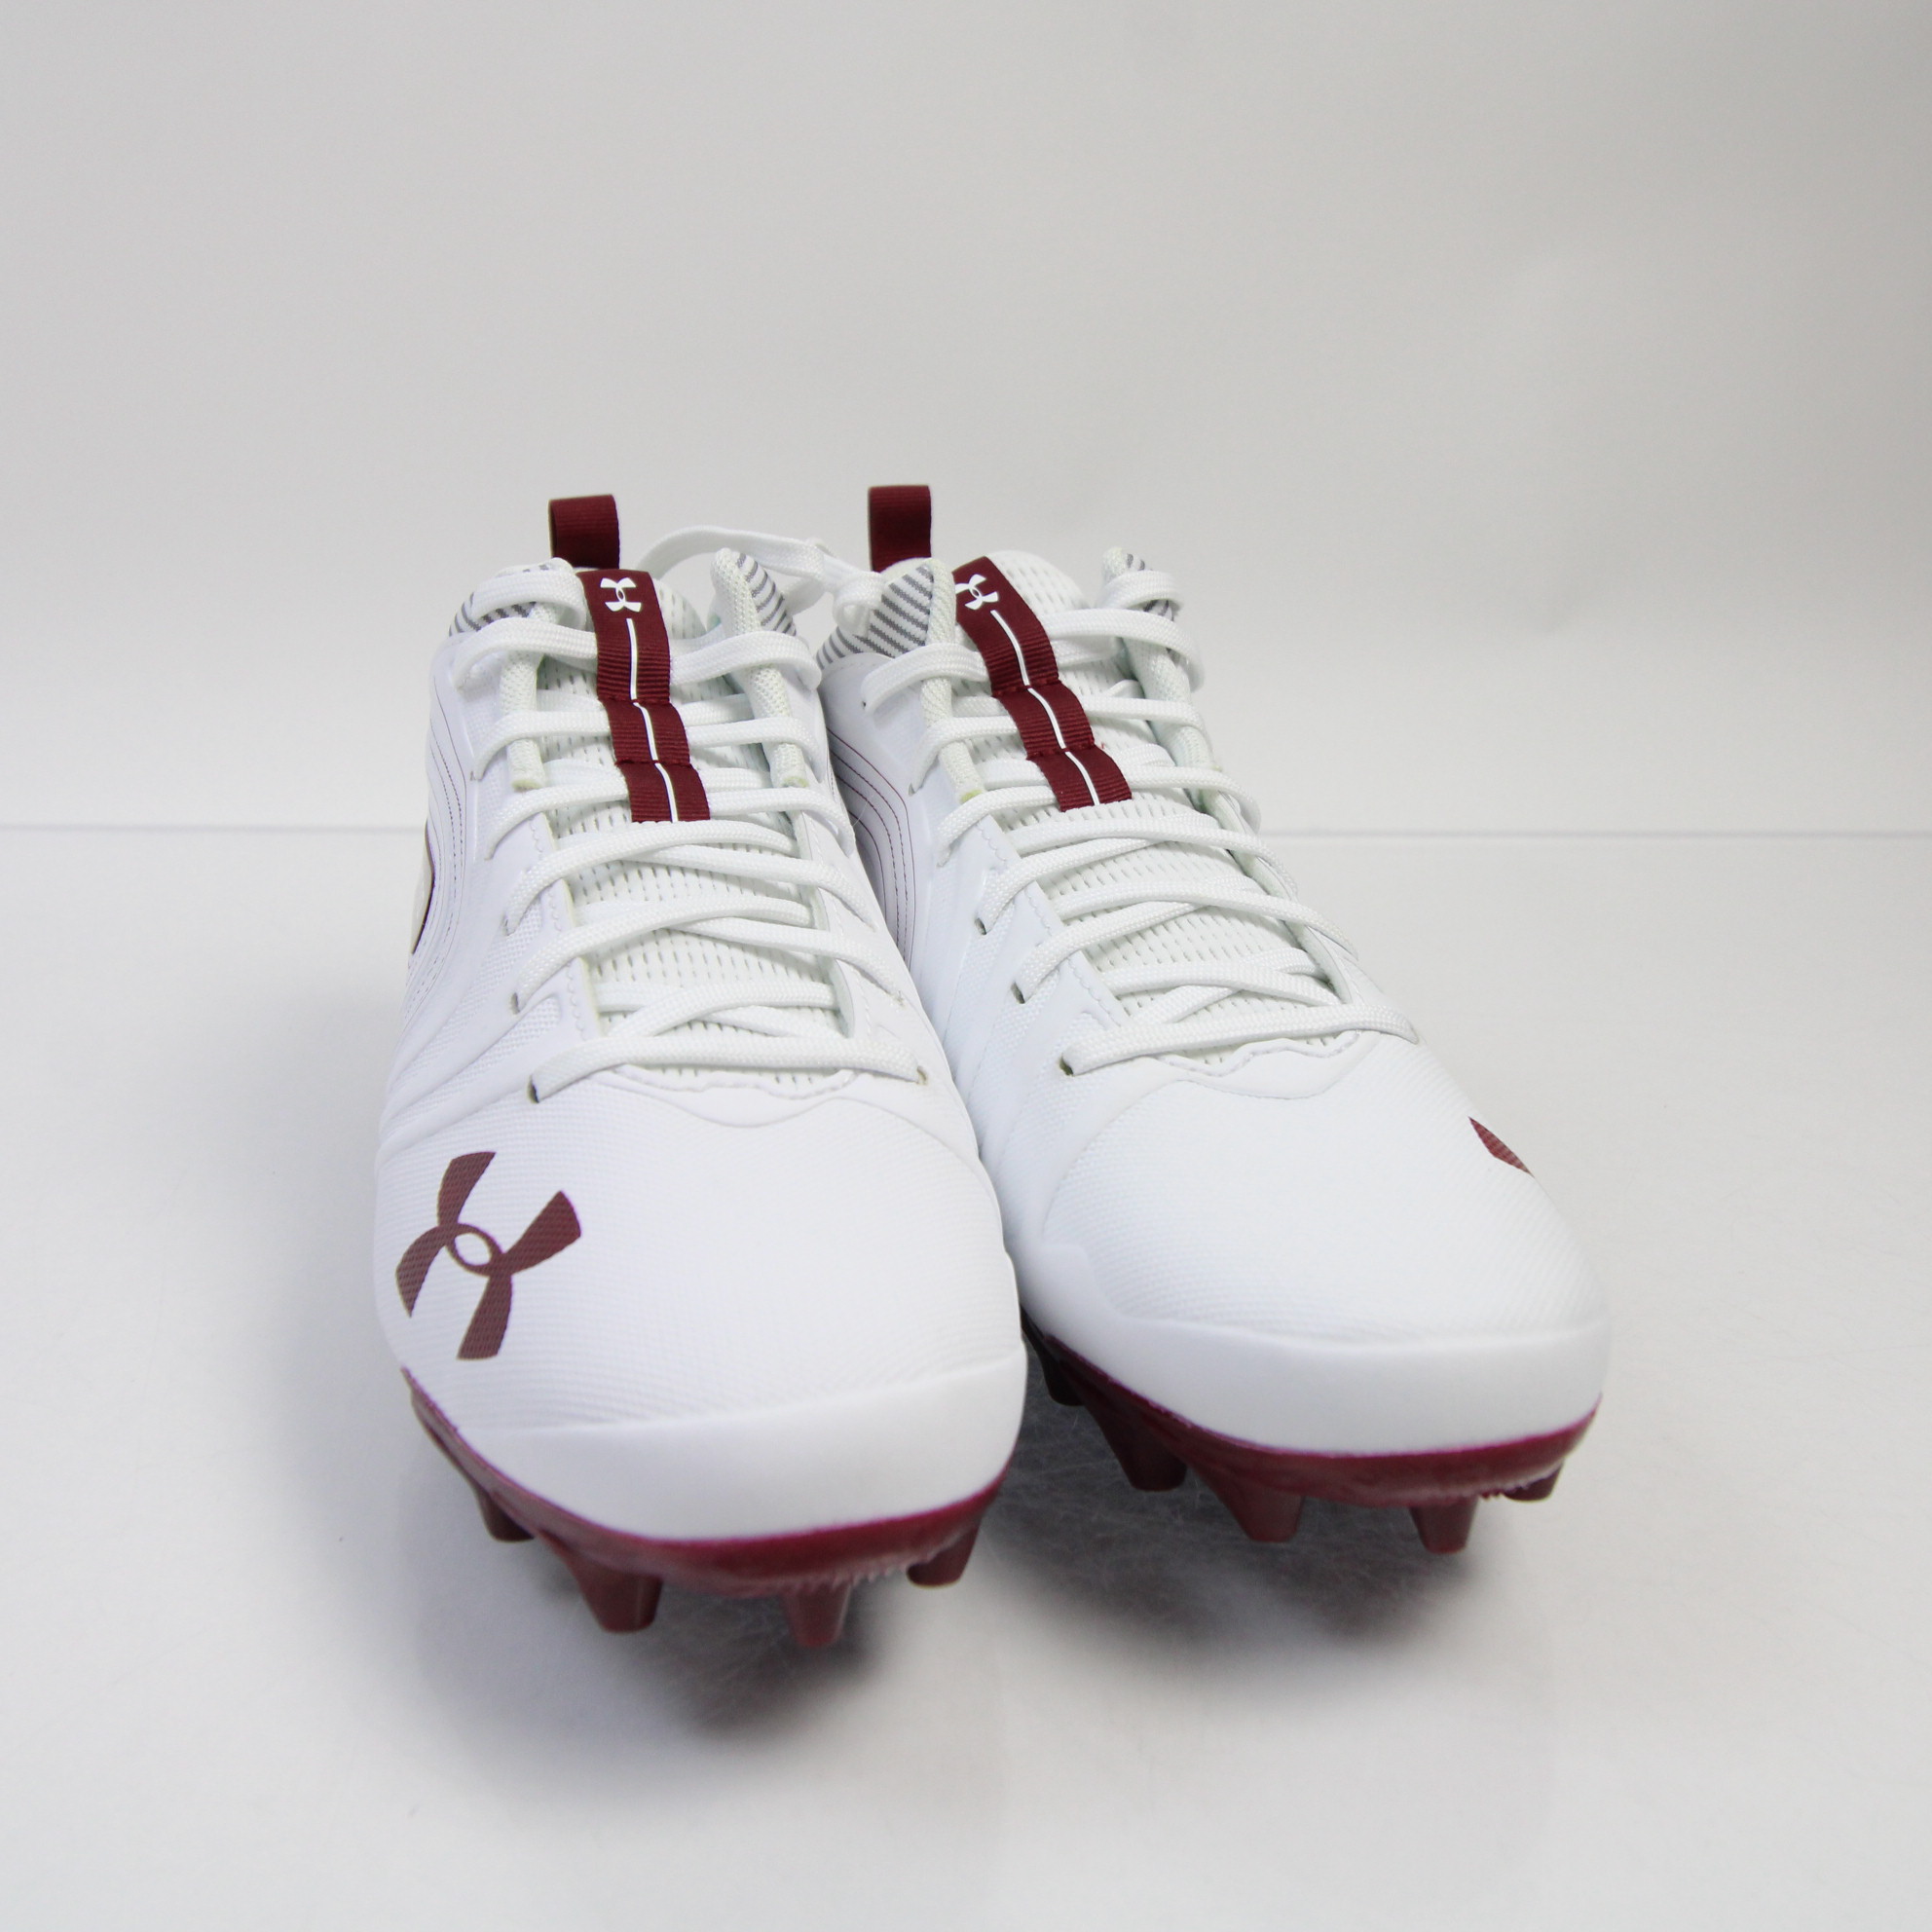 Under Football Cleat Men's White/Maroon New without Box | eBay